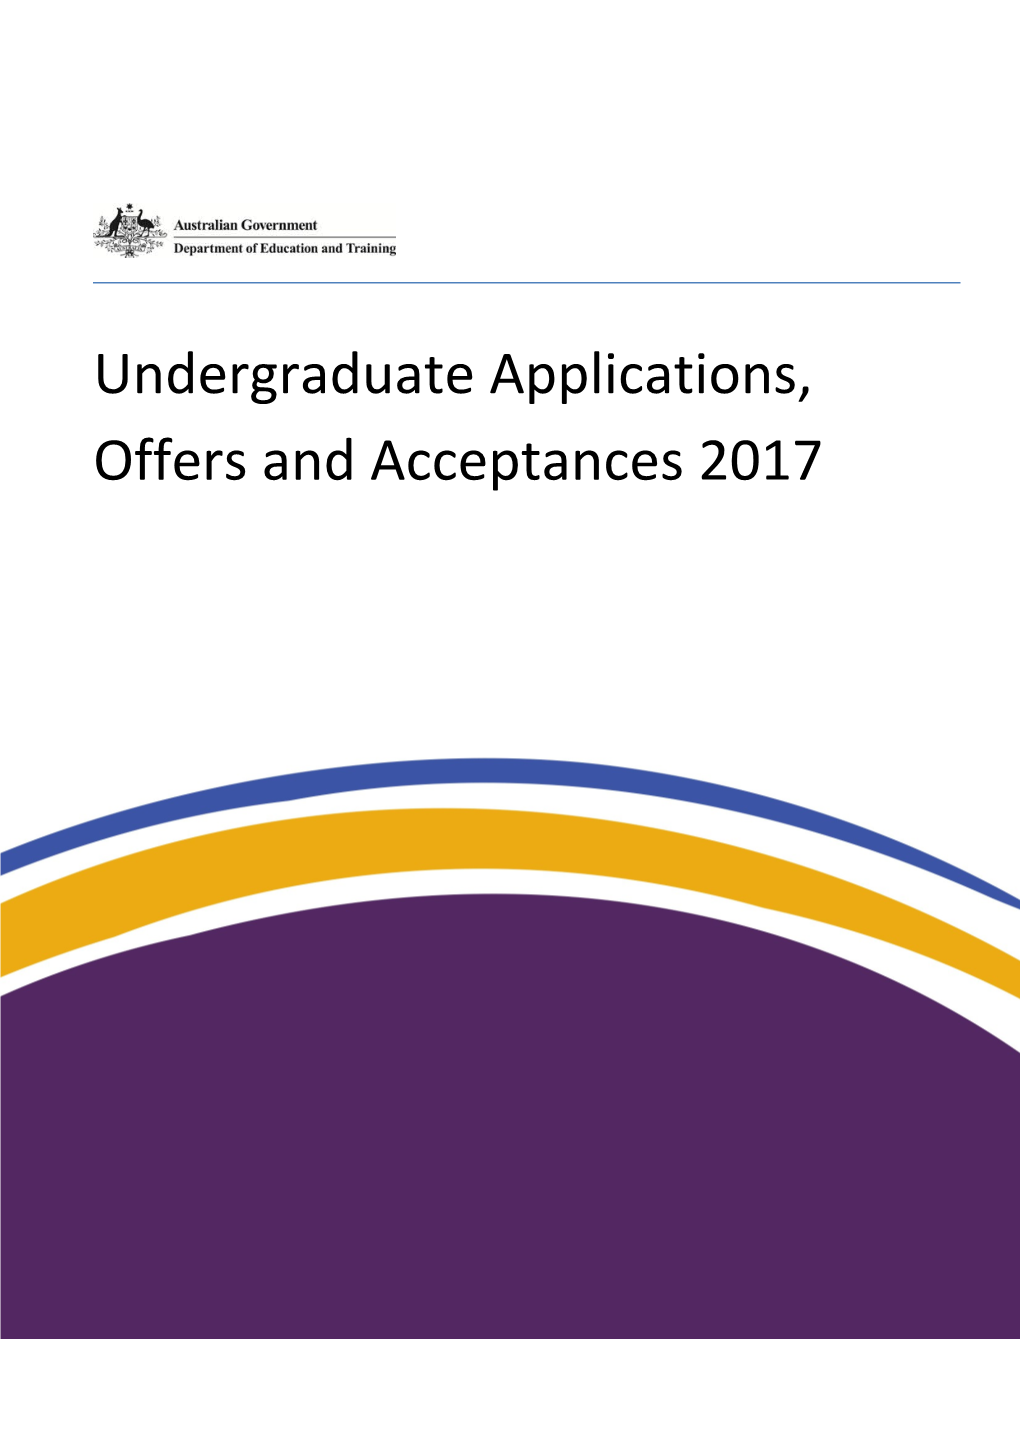 Undergraduate Applications, Offers and Acceptances 2017